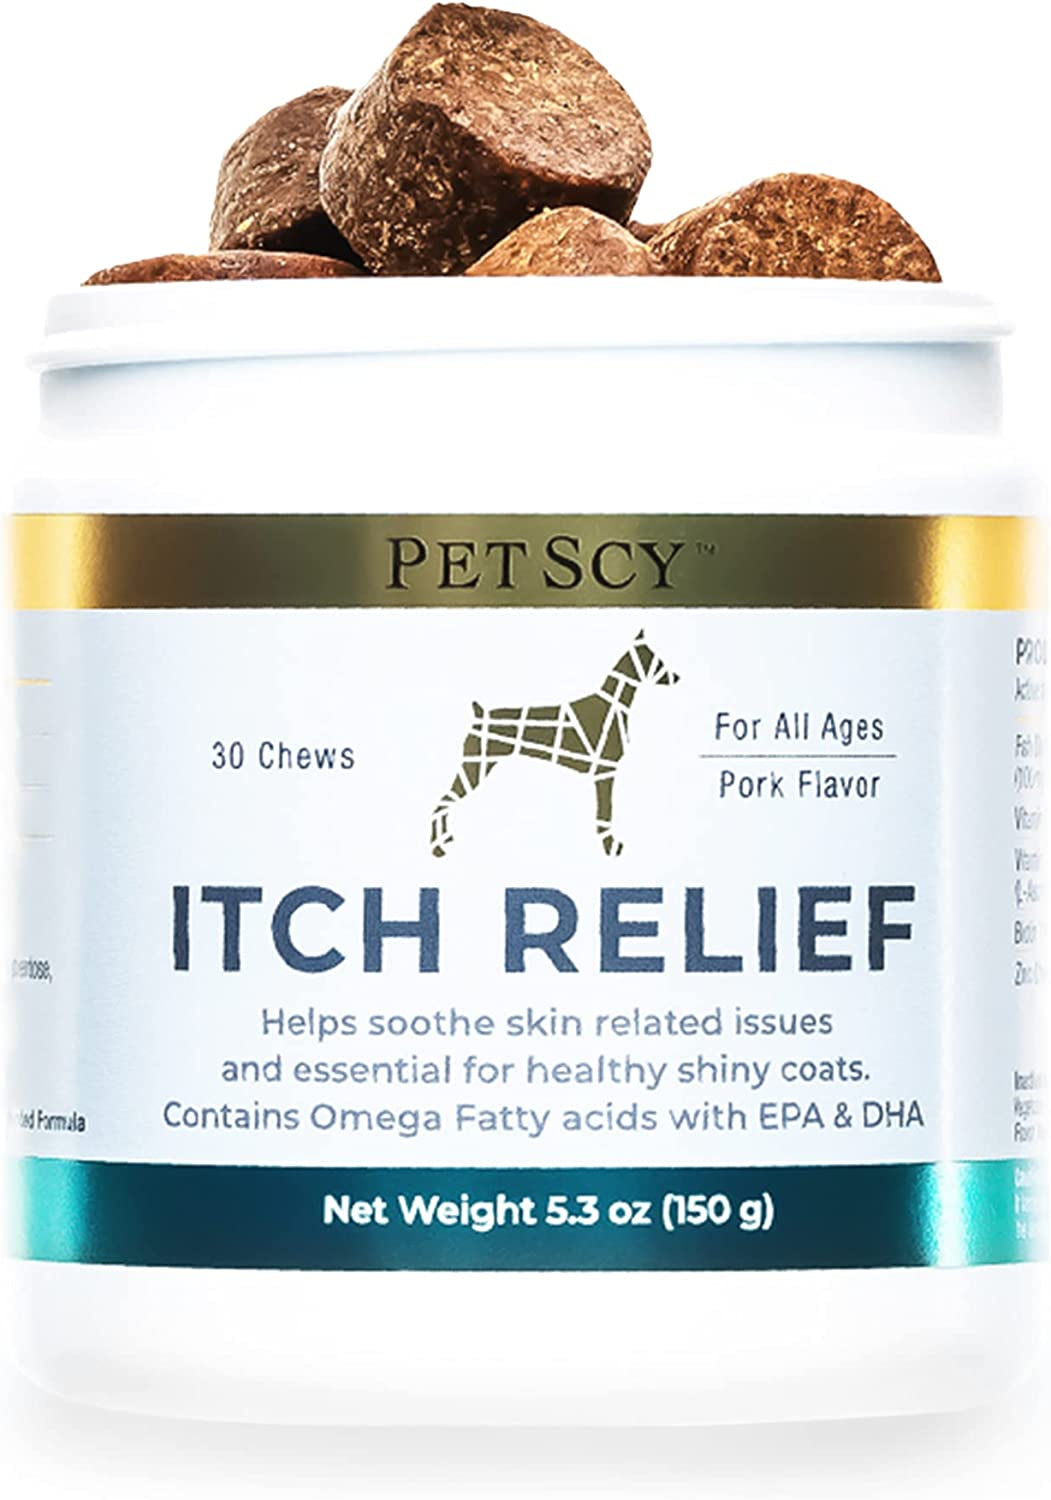 Petscy - Dog Itch Relief with Fatty Acids, EPA, DHA, & Omega, Nutritional Support, Chews for All Ages, Pork Flavor, 30 Chews